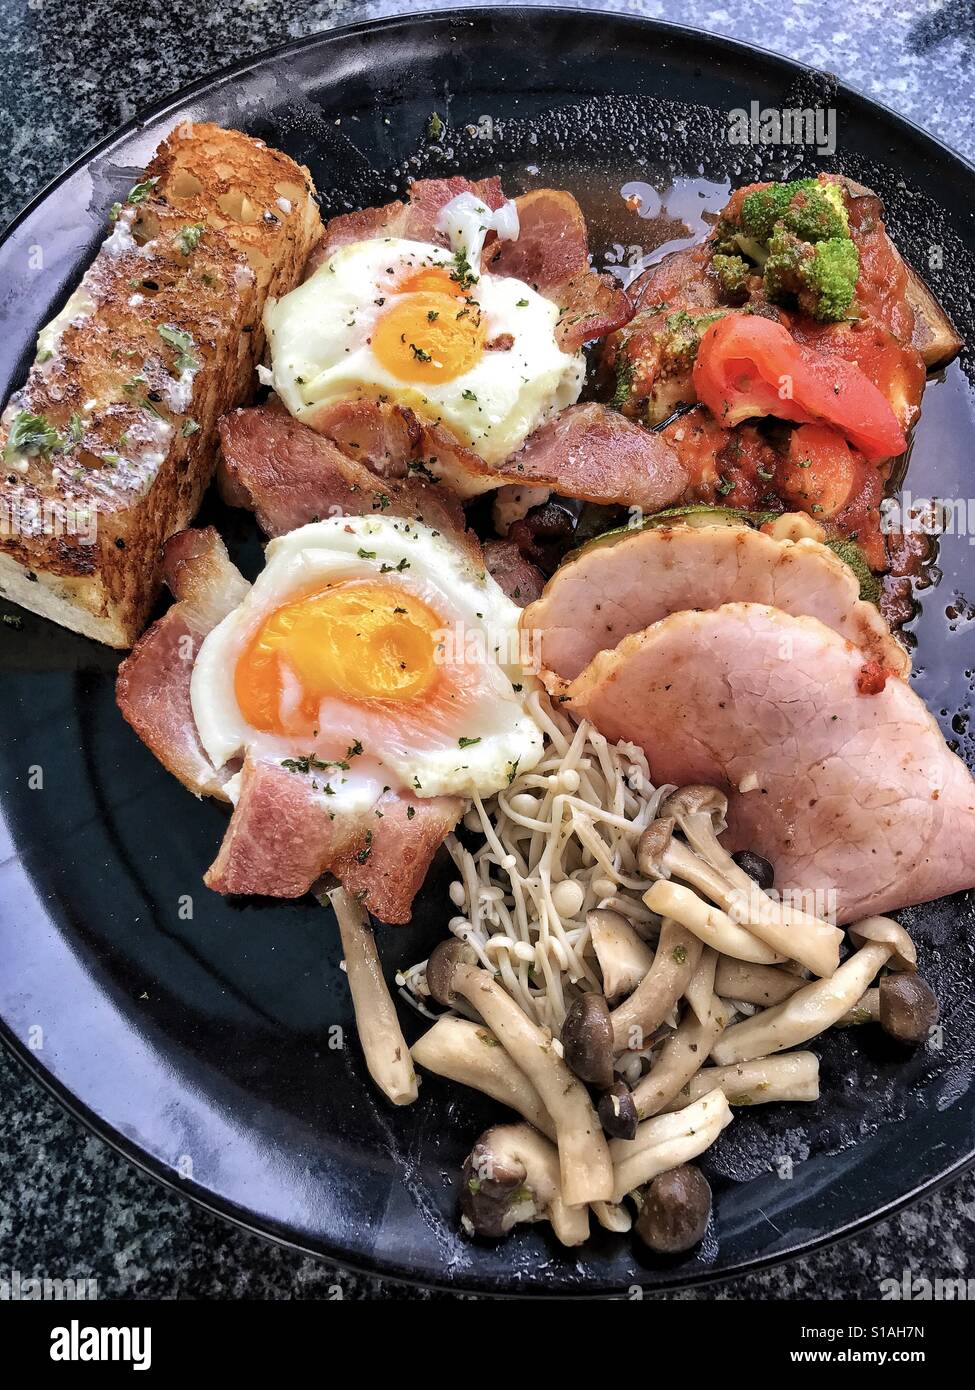 Thailand style mixed grill breakfast with eggs, bacon, ham, courgettes, mushrooms and garlic toasted bread Stock Photo